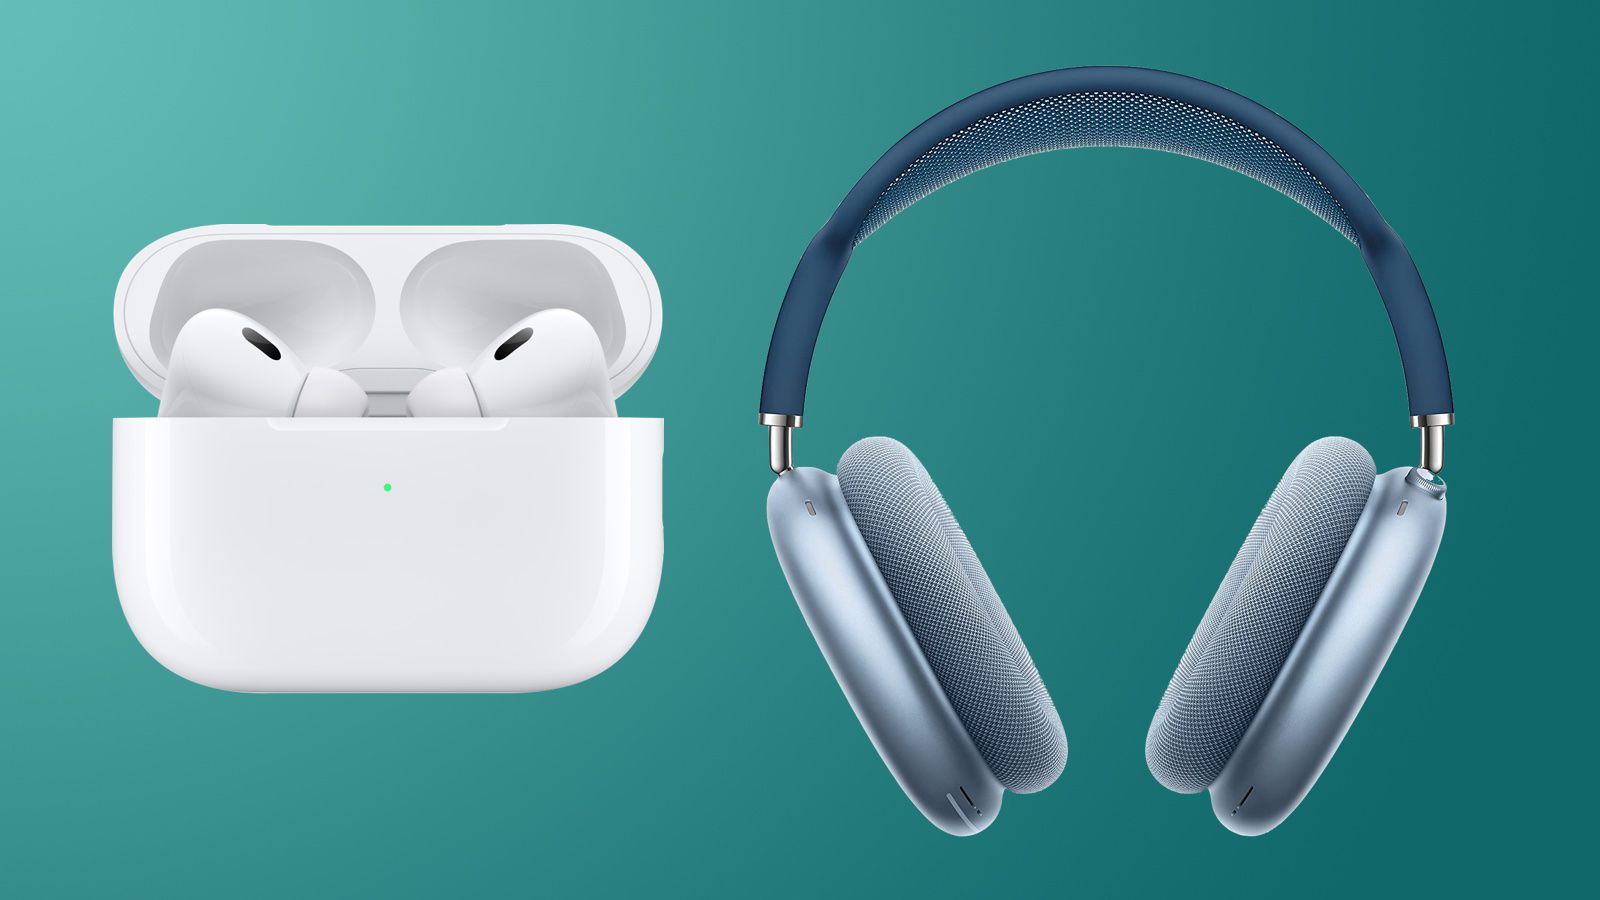 AirPods Max 2 and other Apple wireless earbuds latest rumors